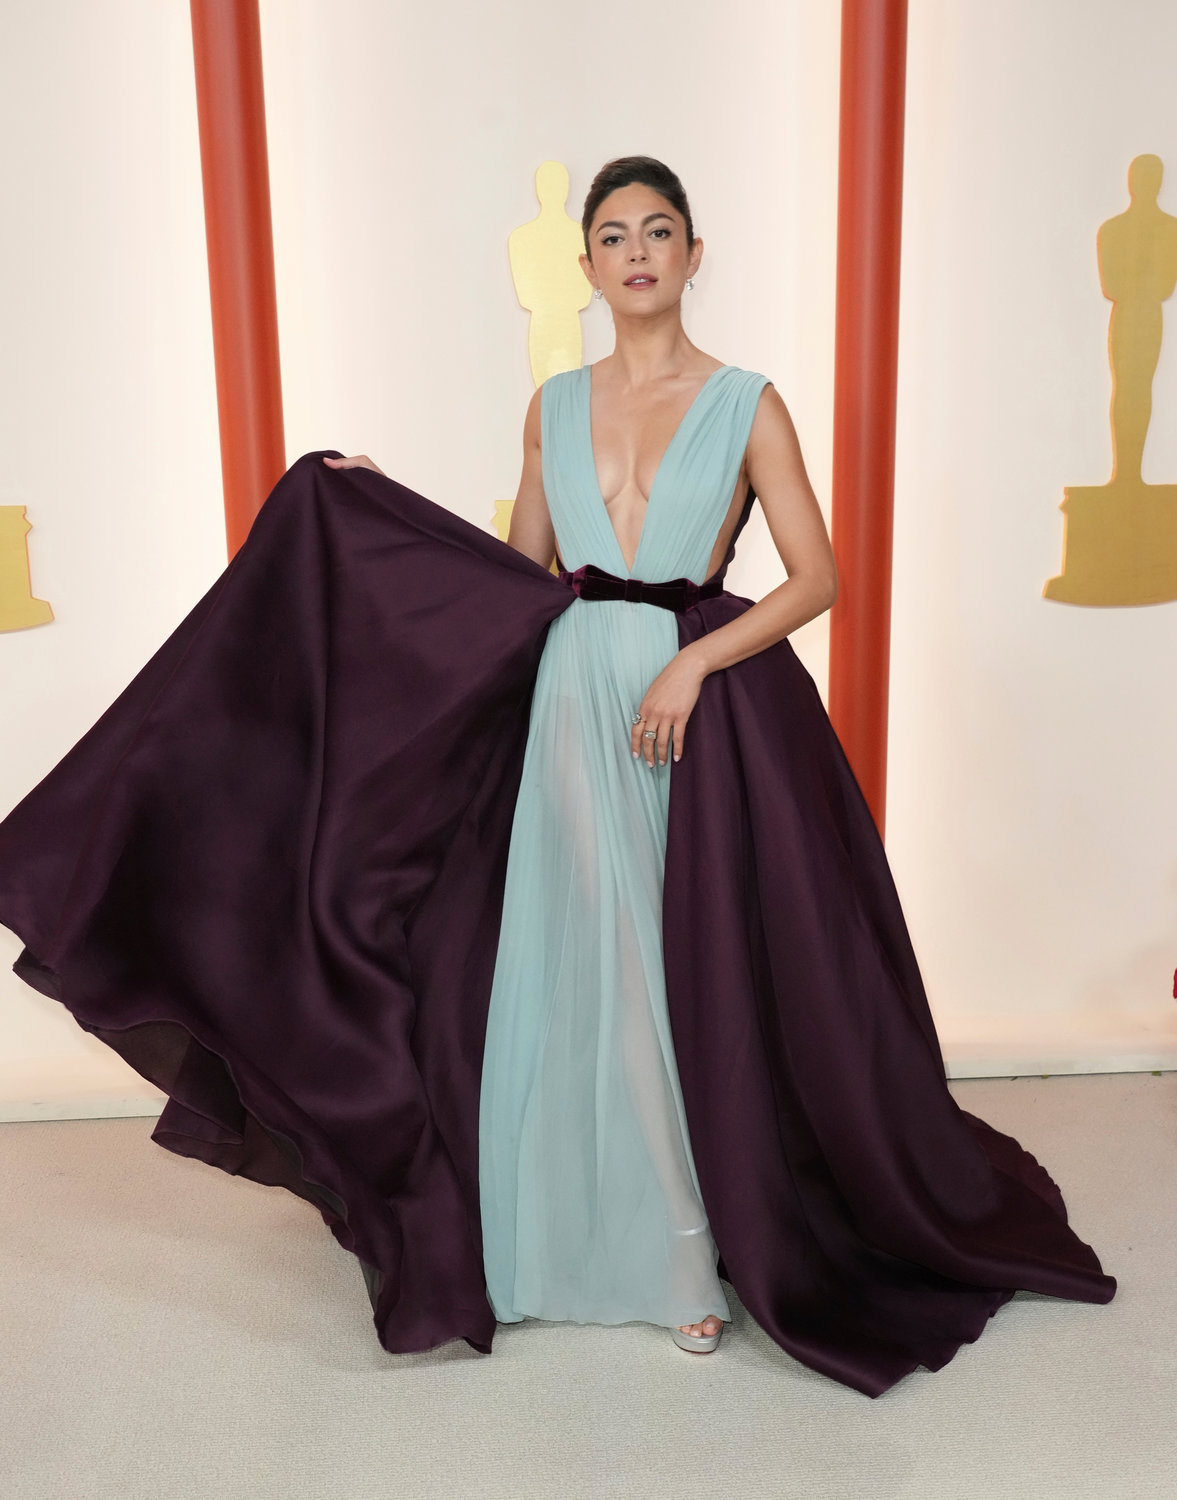 Monica Barbaro arrives at the Oscars on Sunday, March 12, 2023, at the Dolby Theatre in Los Angeles. (Photo by Jordan Strauss/Invision/AP)